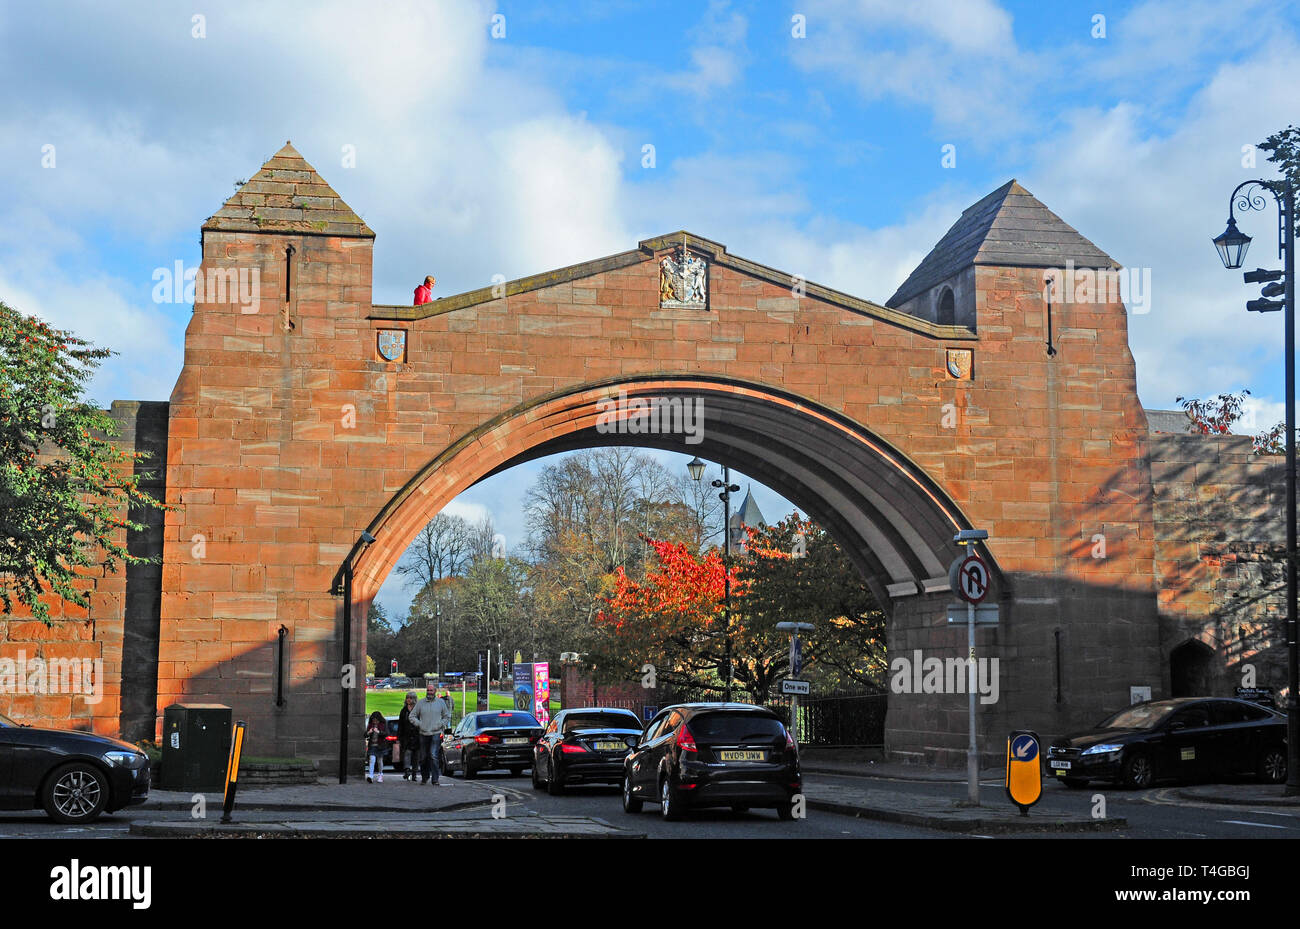 New Gate in the city walls, Chester. Stock Photo